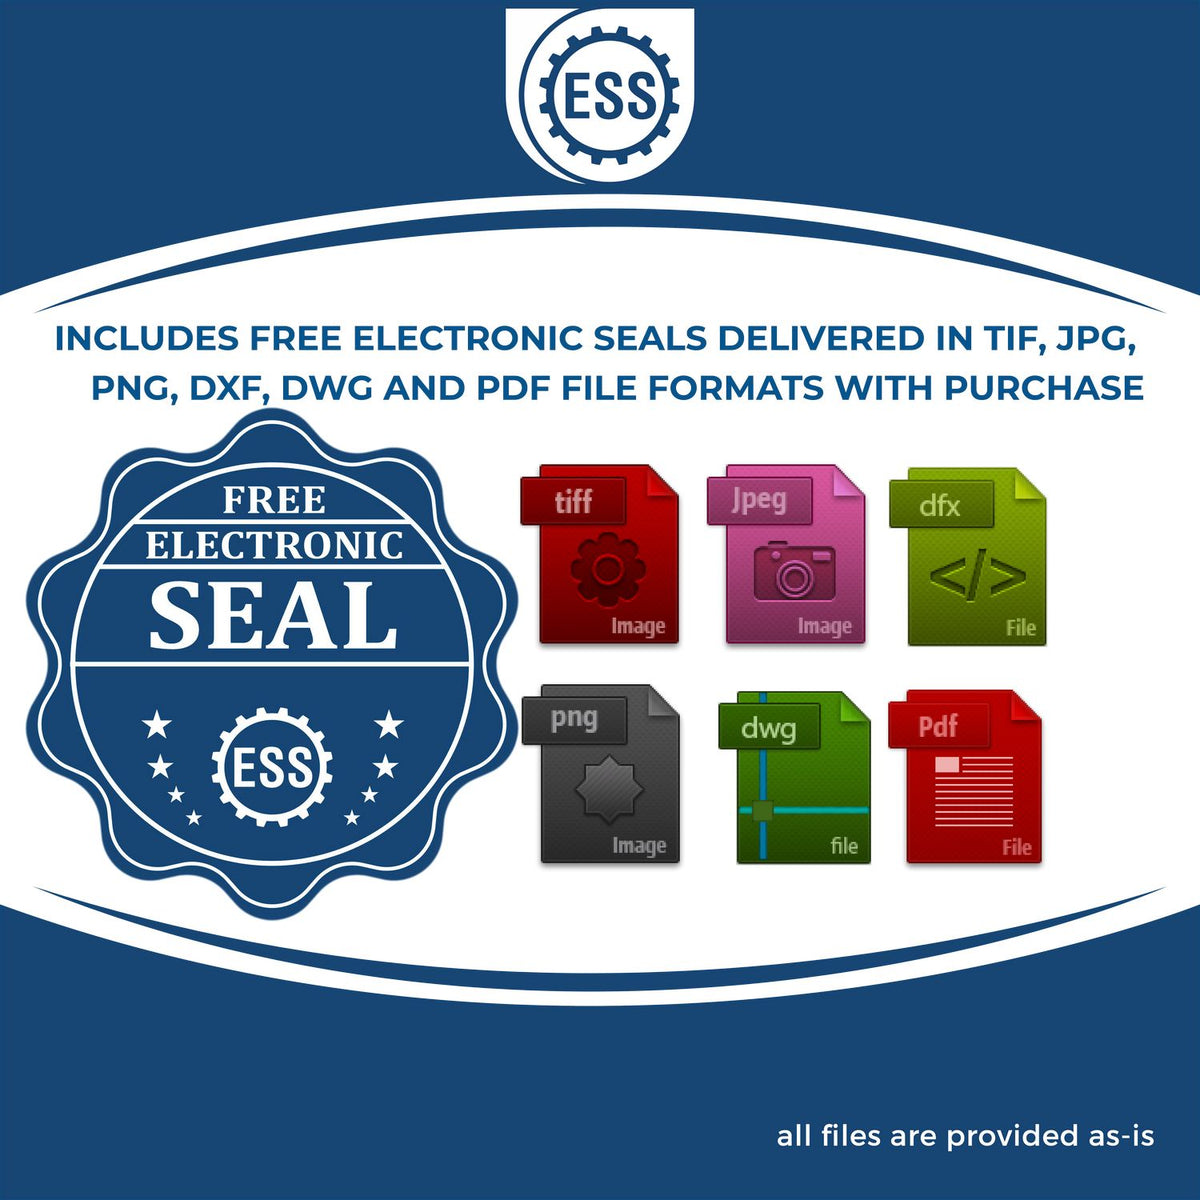 An infographic for the free electronic seal for the State of Maine Extended Long Reach Geologist Seal illustrating the different file type icons such as DXF, DWG, TIF, JPG and PNG.